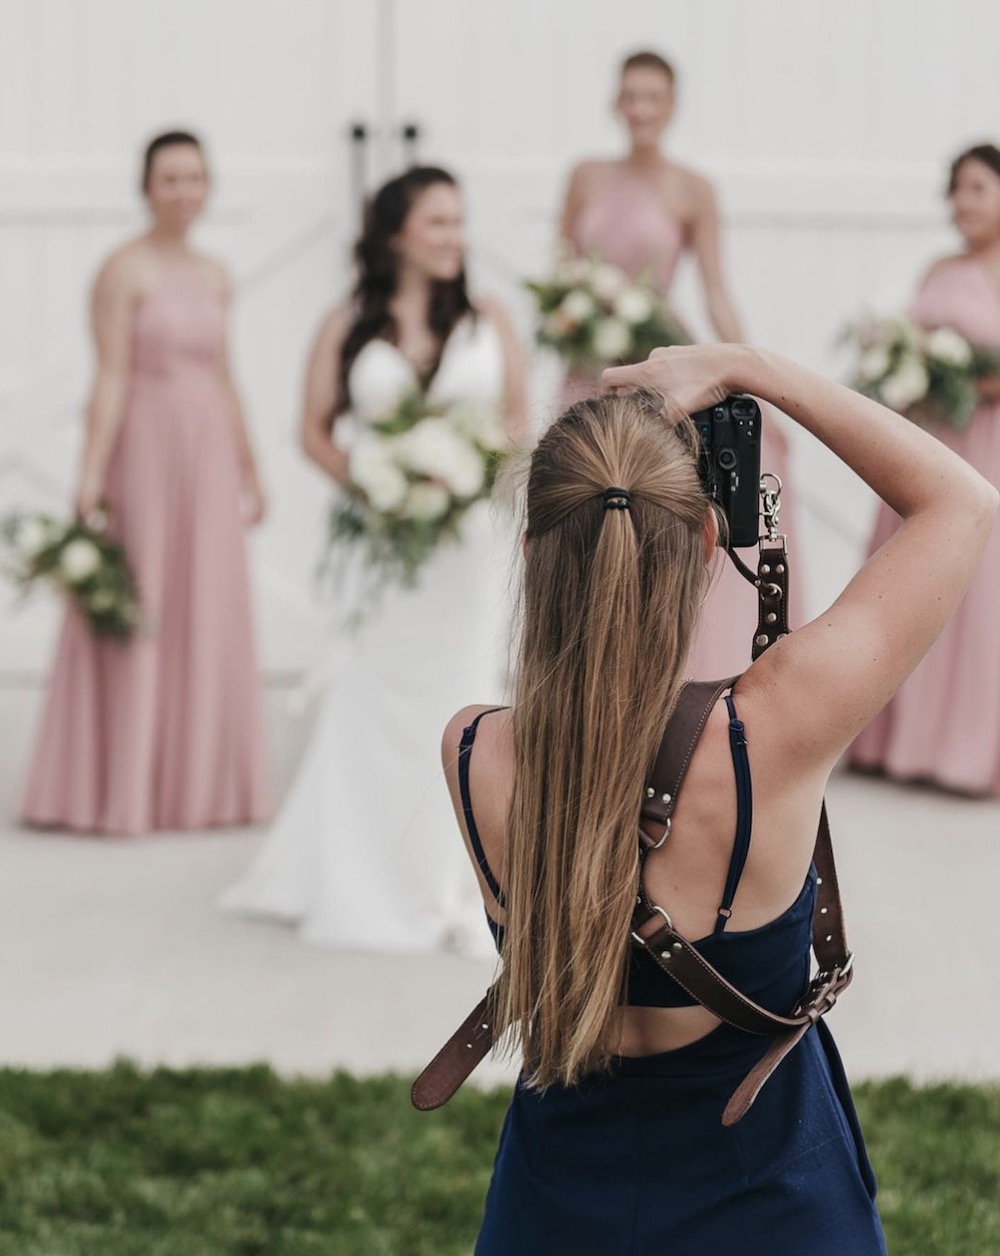 Rachel Yearick in action taking a photo of the bride with her bridesmaids at a wedding shoot